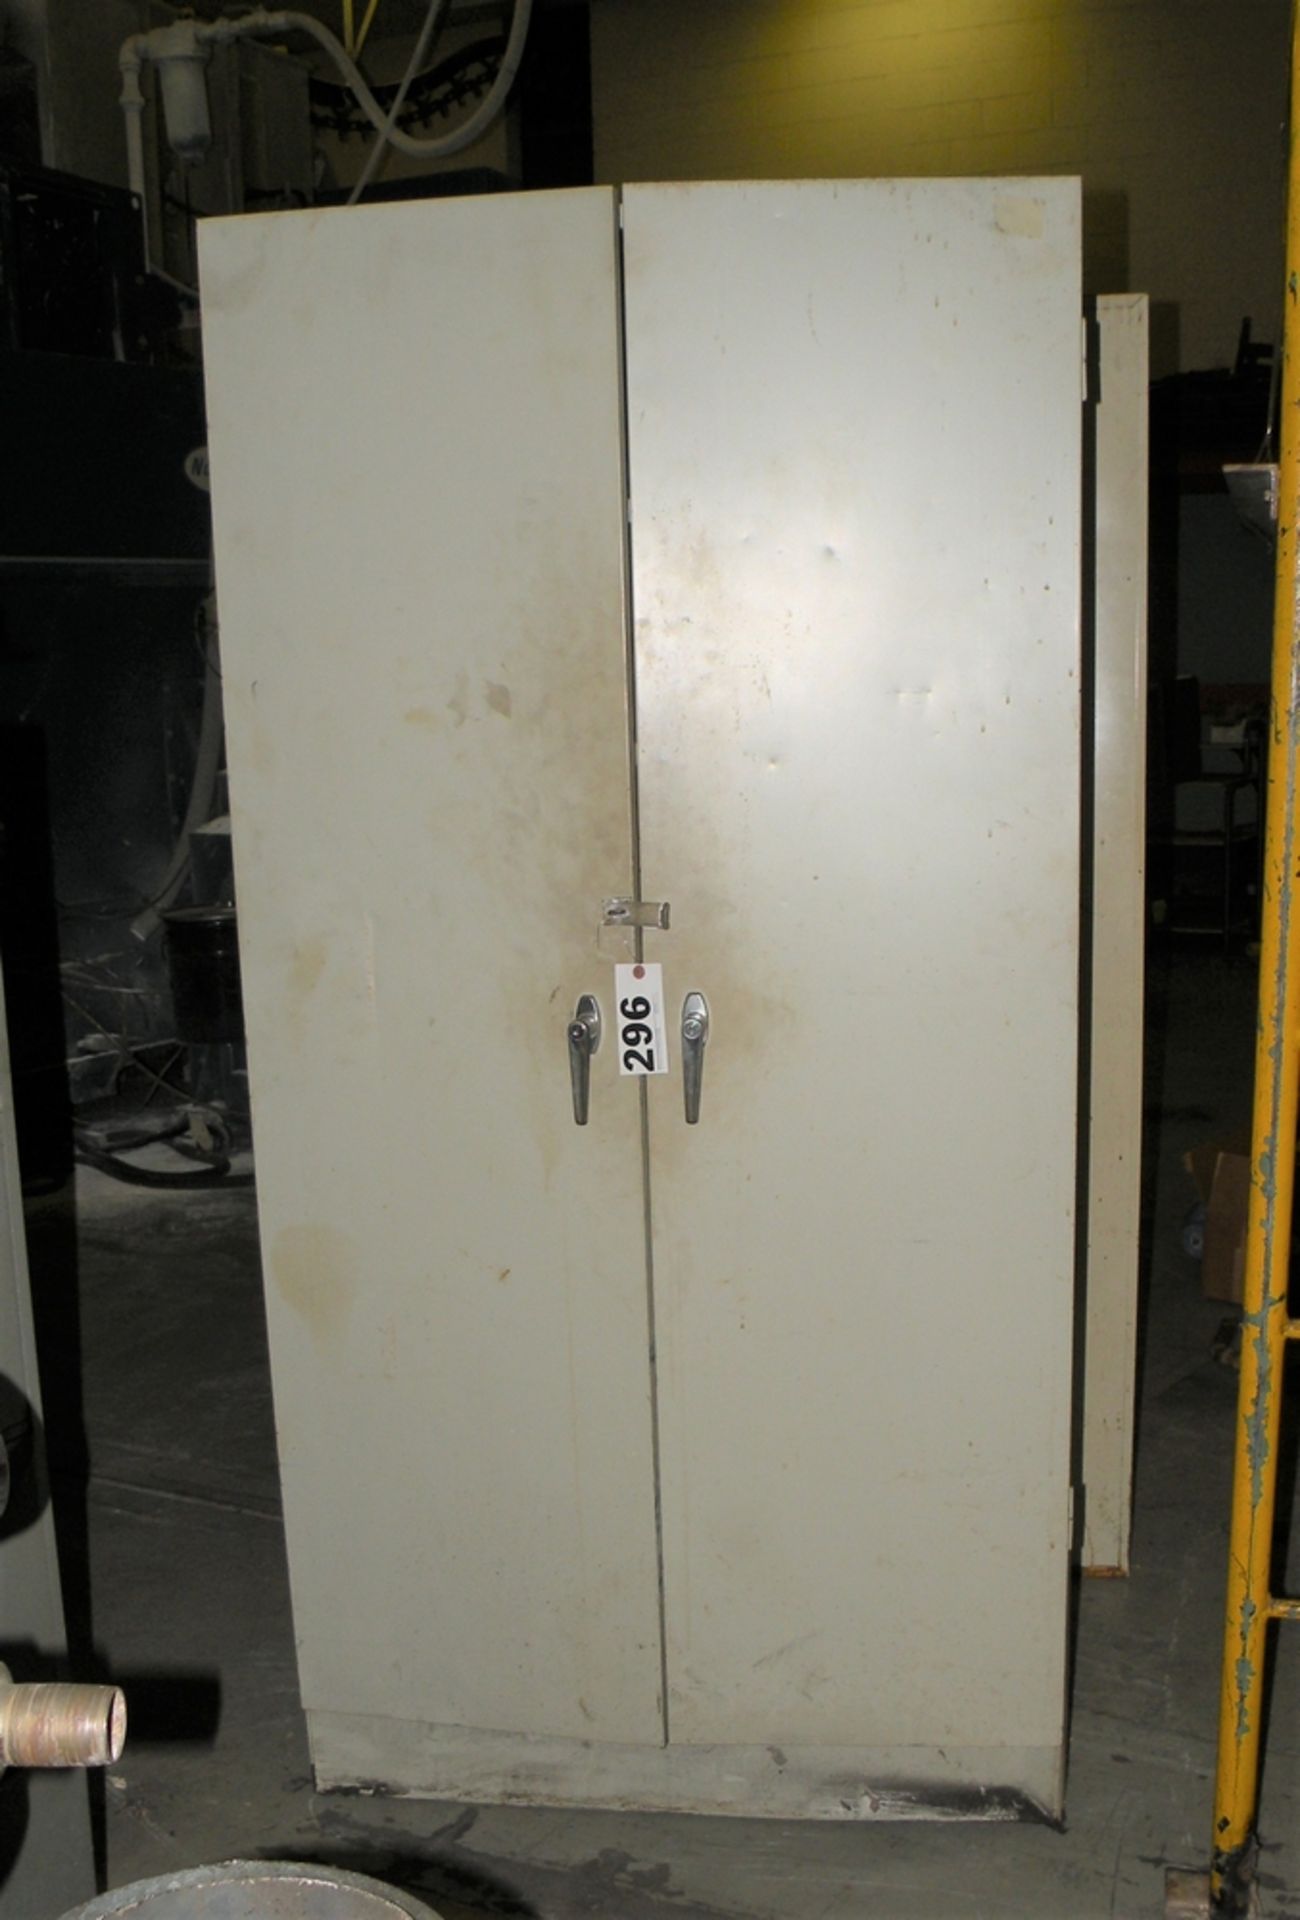 Metal Cabinet w/Metal Stainless or Chrome Valve Stems, Covers, Valve Cores.. (Martin TN) - Image 6 of 6